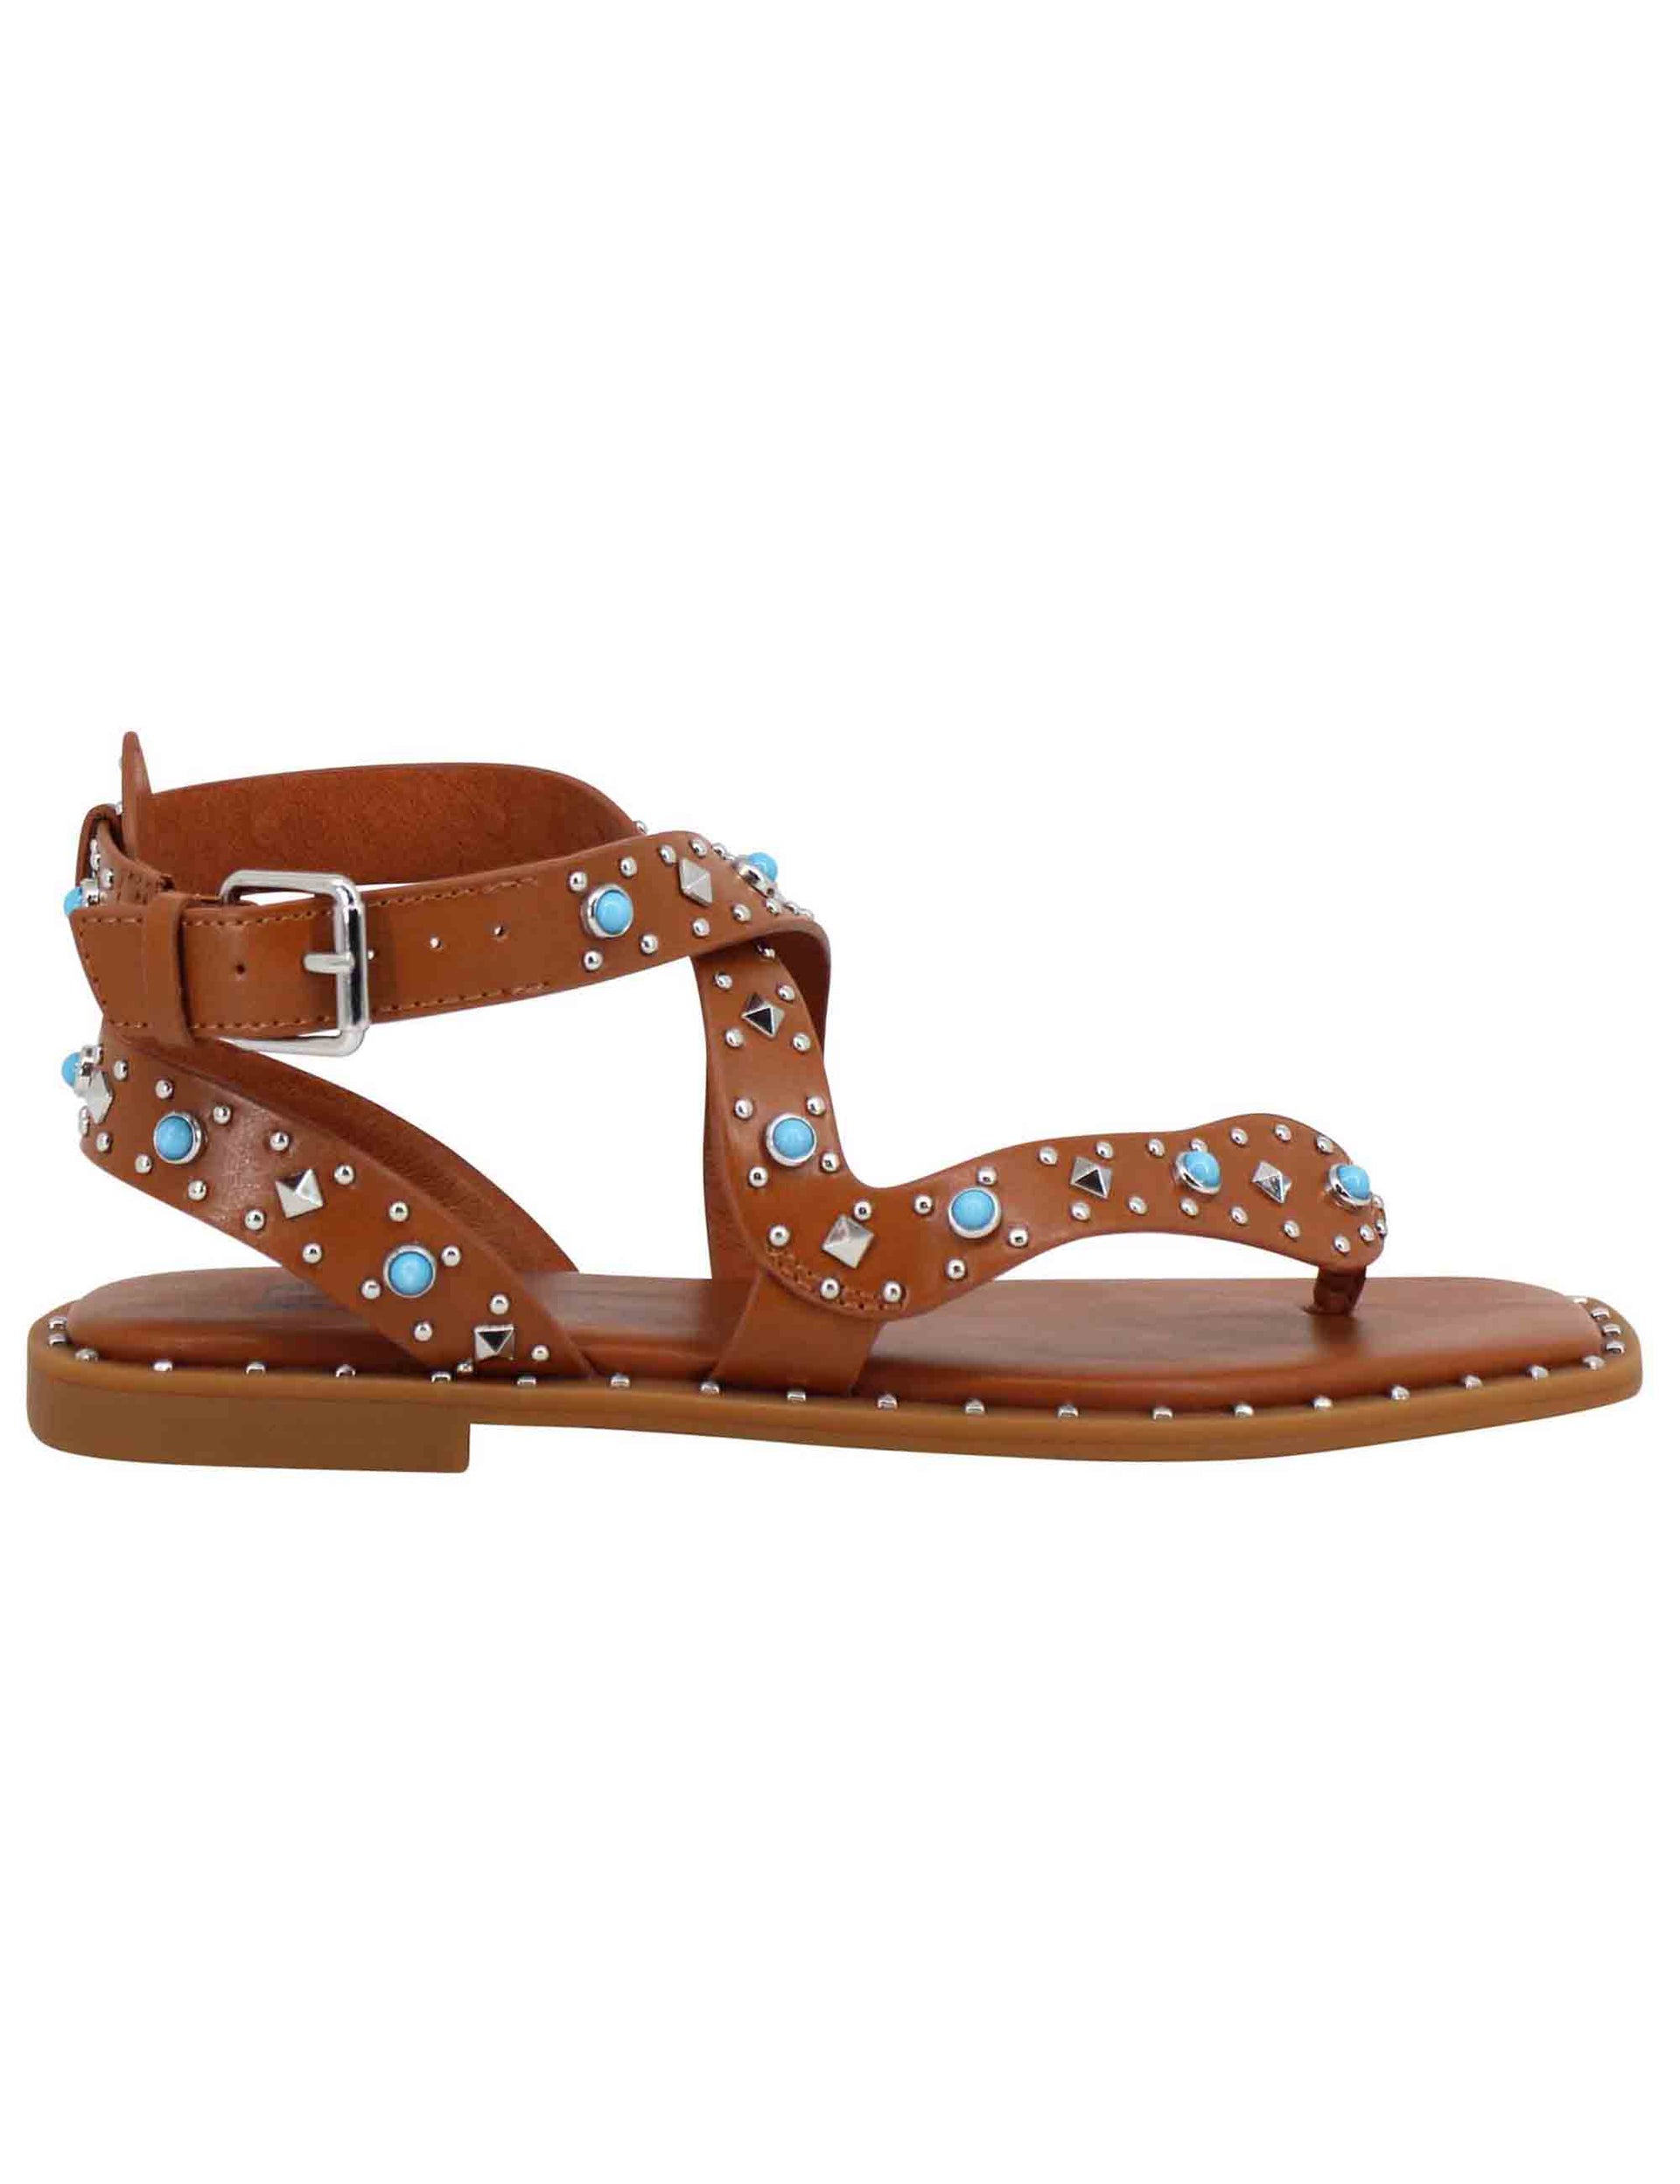 Women's flat sandals in eco leather with rhinestones and studs with Petra ankle strap